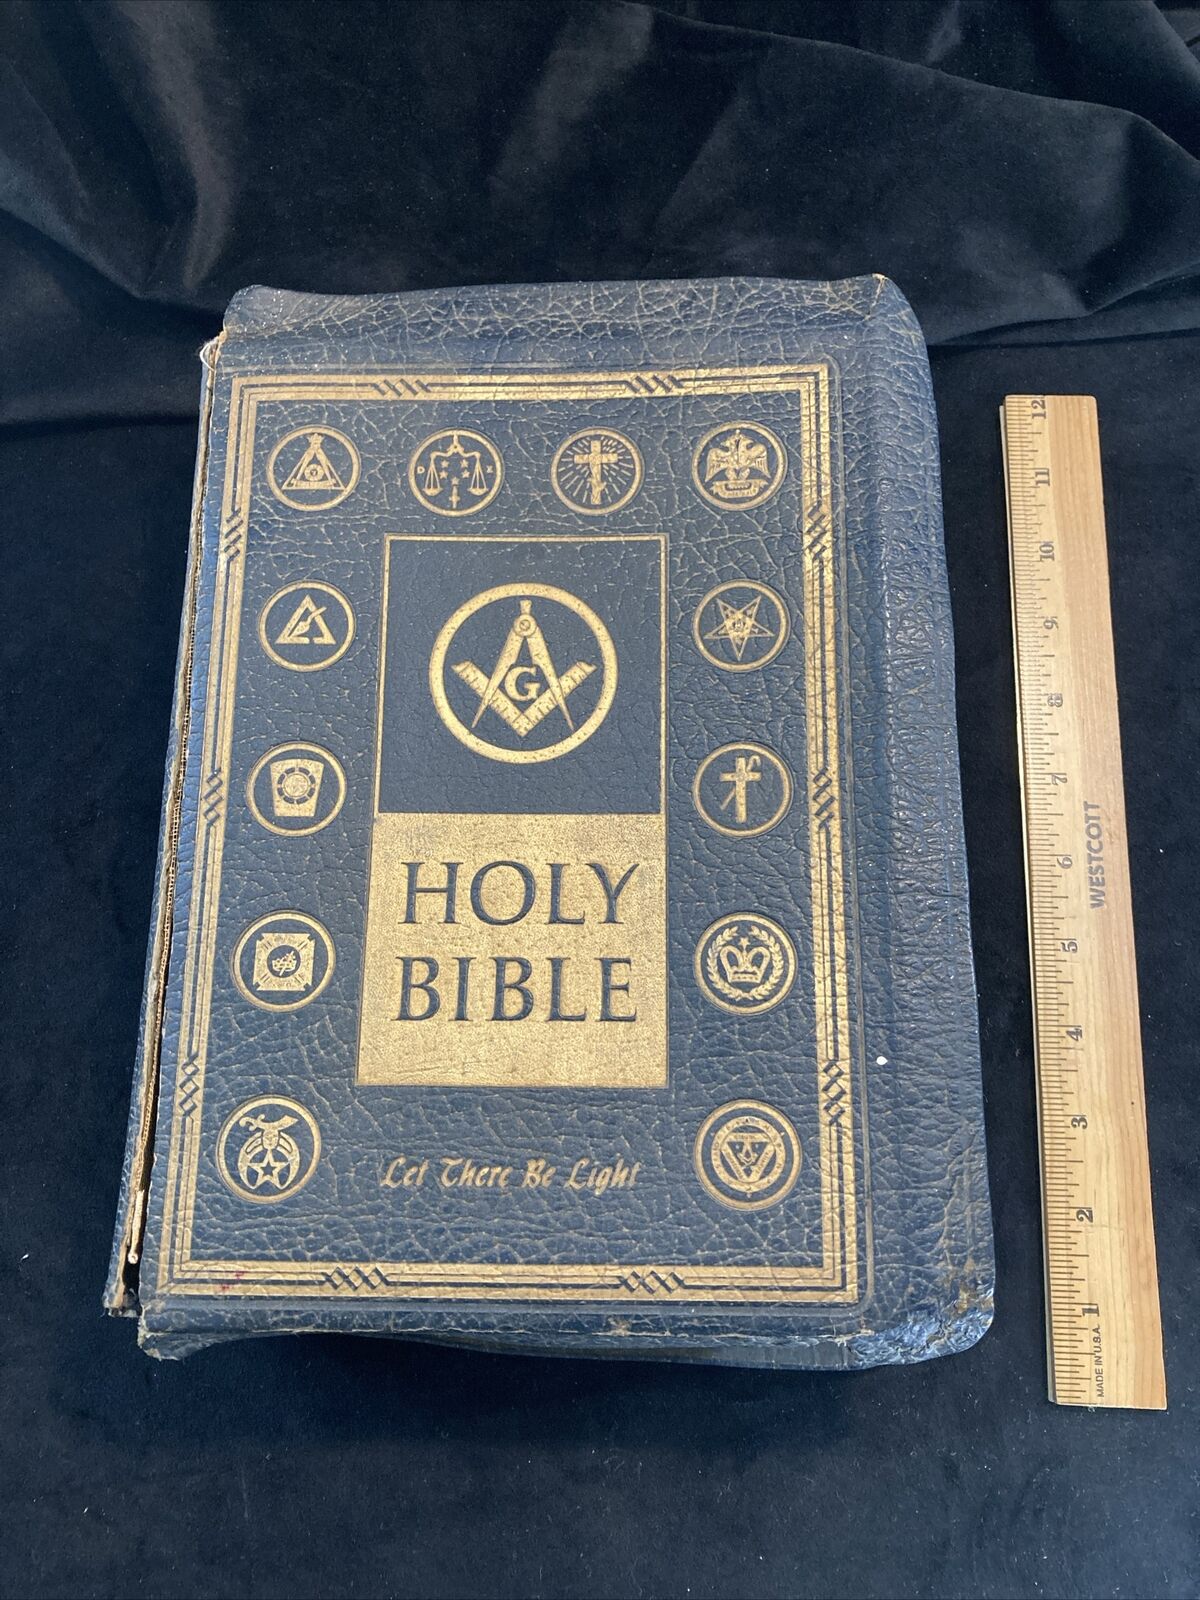 Vintage Holy Bible Let There Be Light Masonic Edition 1955 Leather Binding Poor